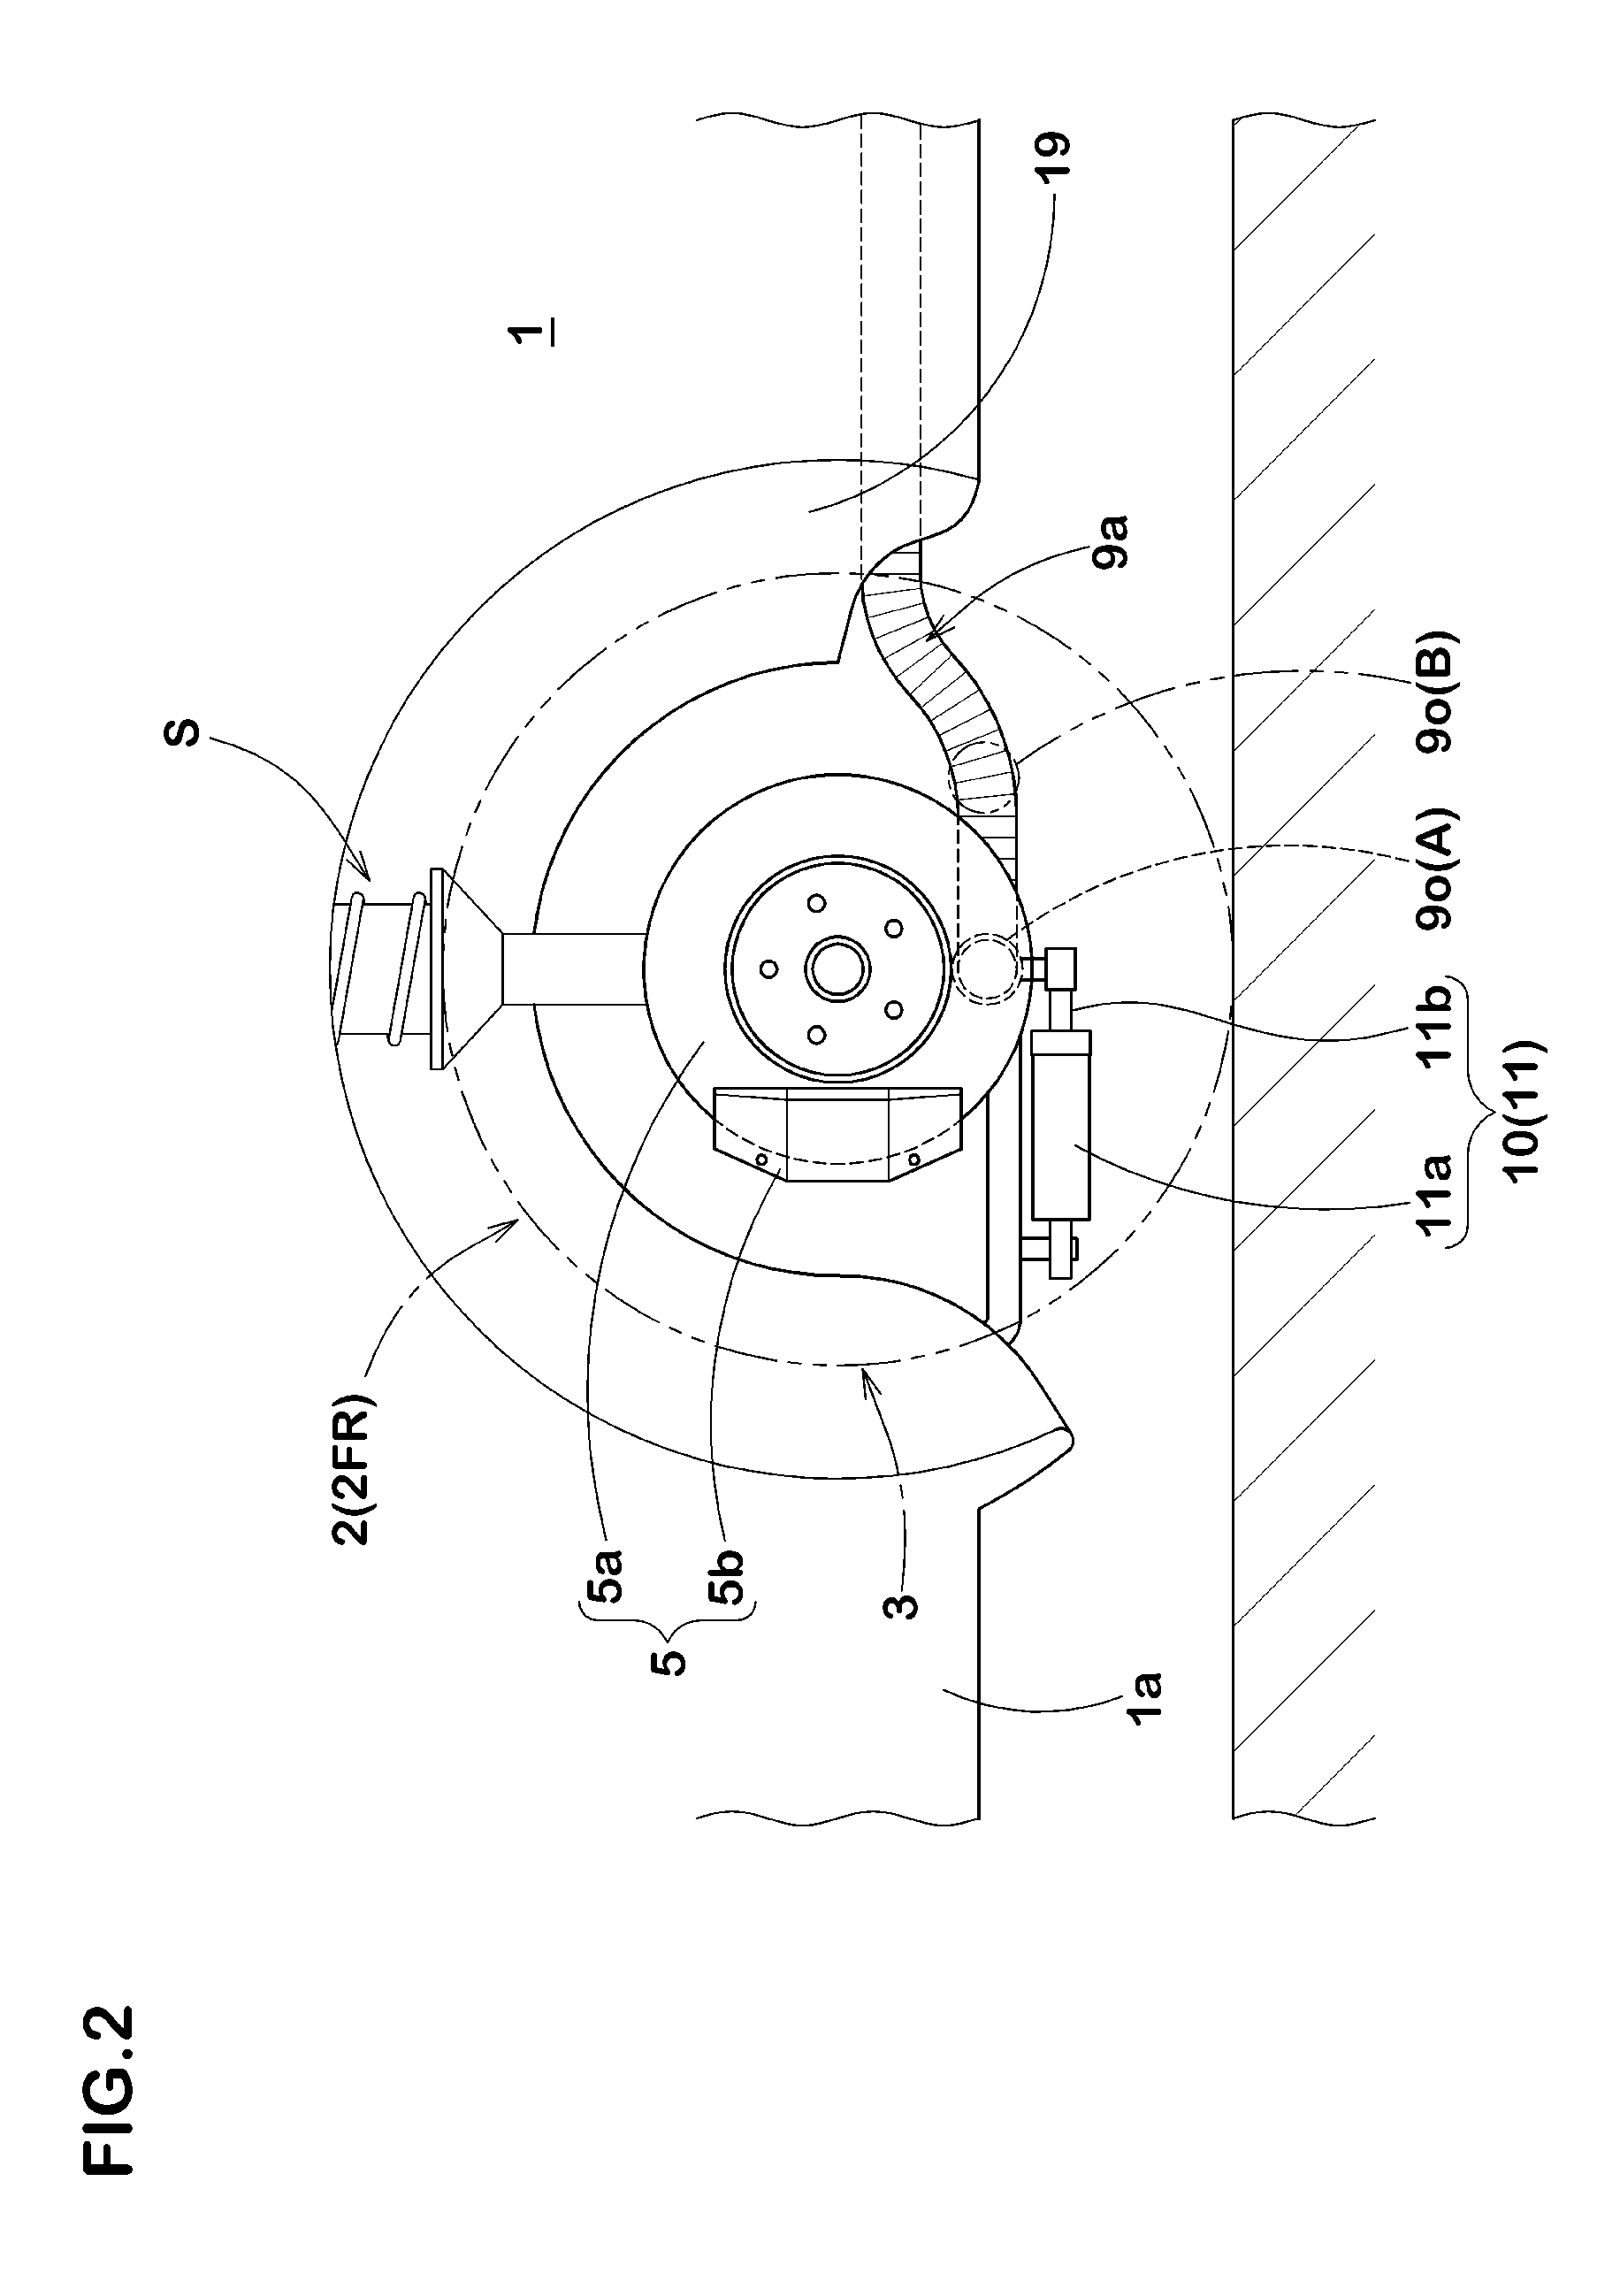 Vehicle with pneumatic tire and method for cooling tire in the vehicle